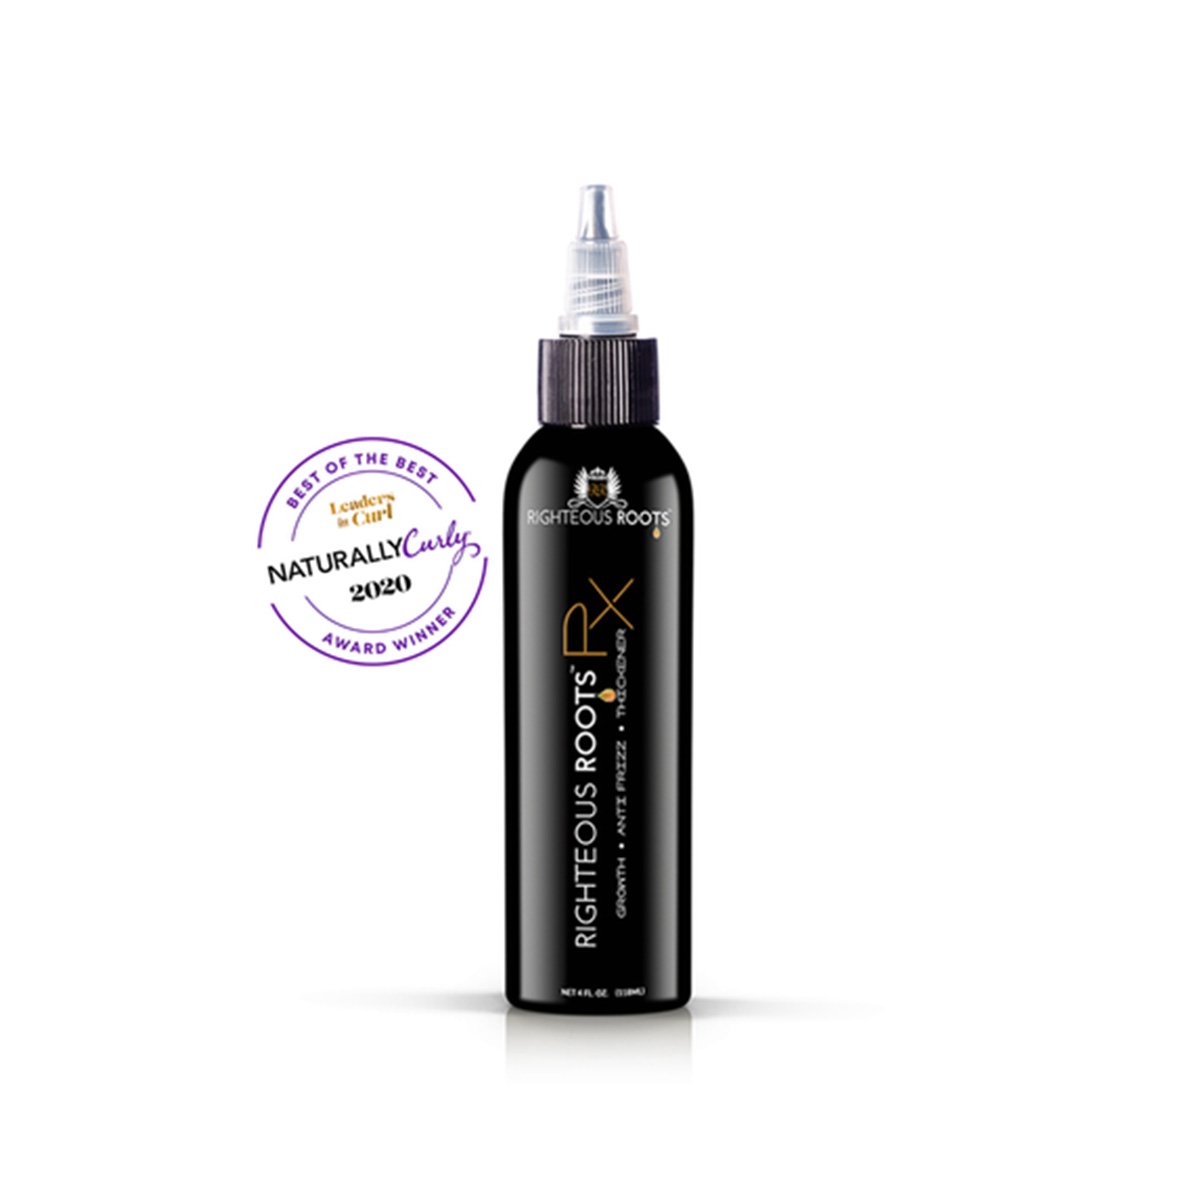 Righteous Roots RX - Rejuvenating Hair Growth Serum - Curly Miss